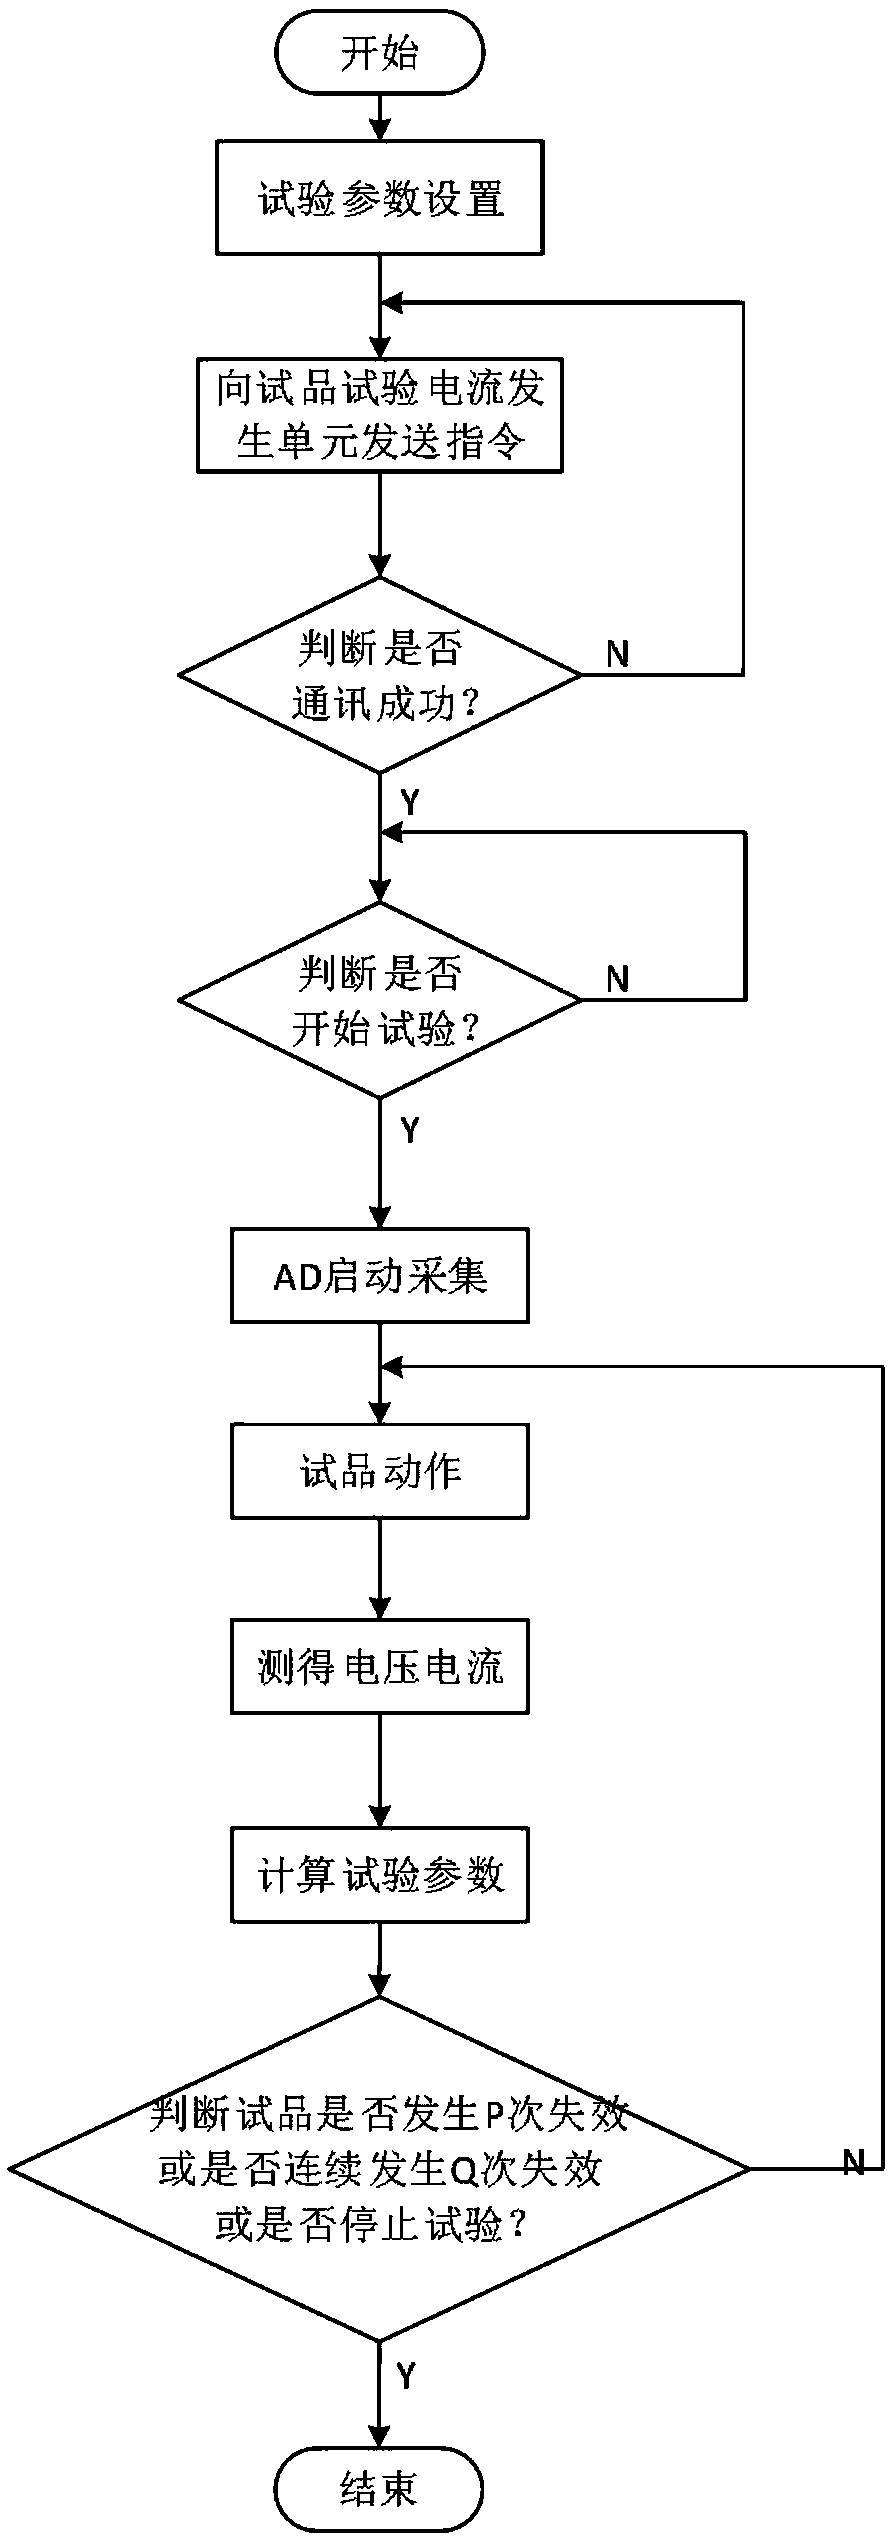 Low-voltage electrical appliance life test device based on AC solid-state simulated load